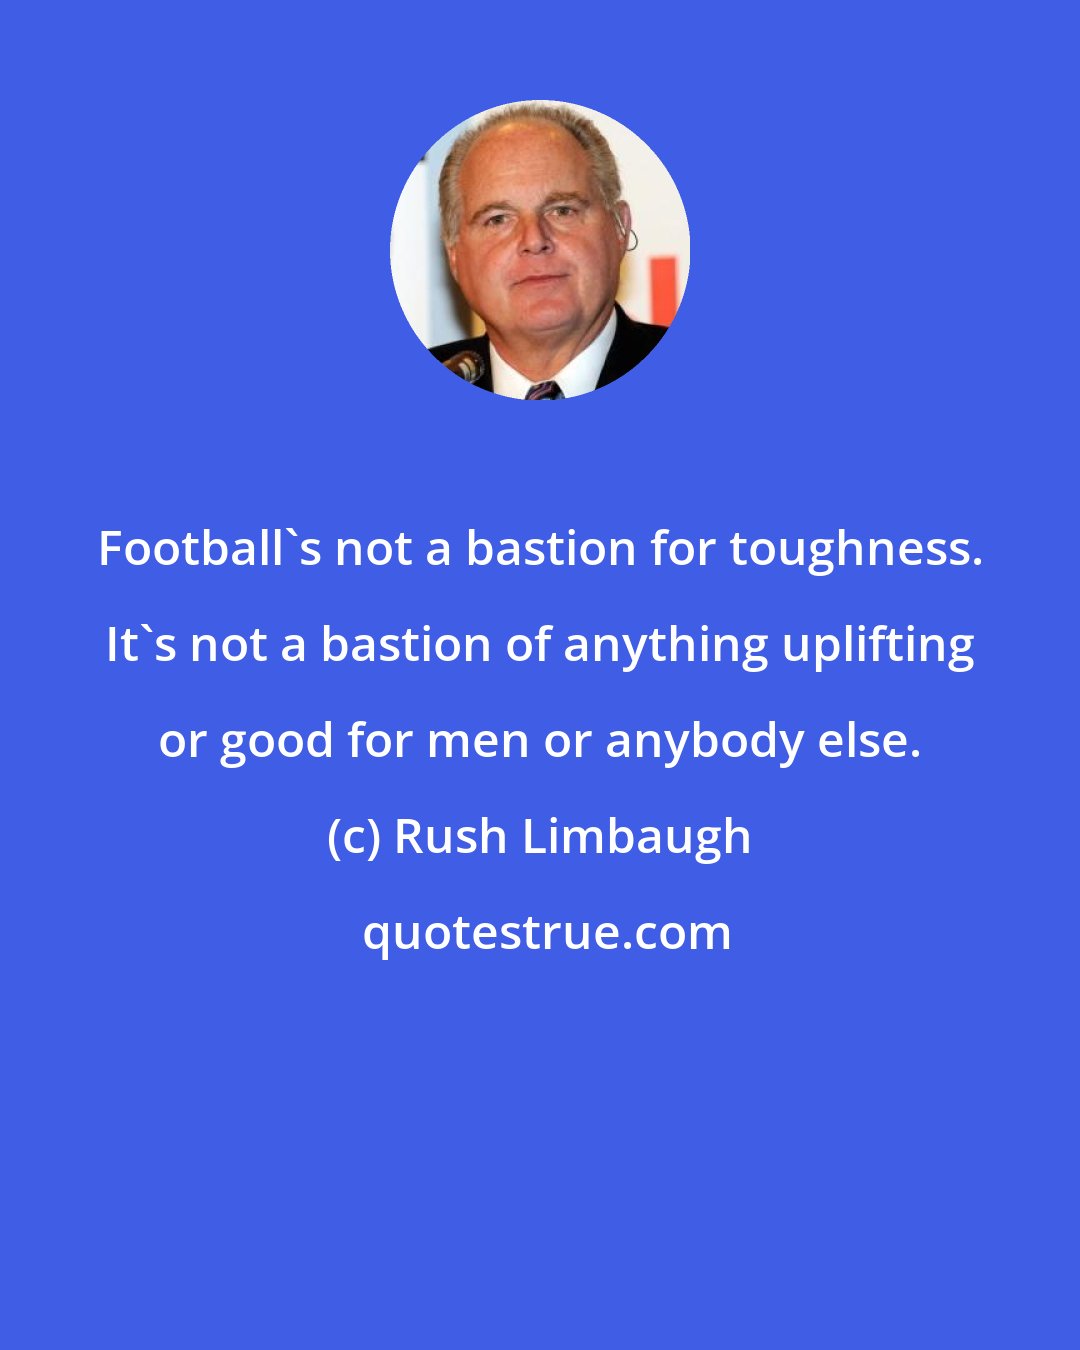 Rush Limbaugh: Football's not a bastion for toughness. It's not a bastion of anything uplifting or good for men or anybody else.